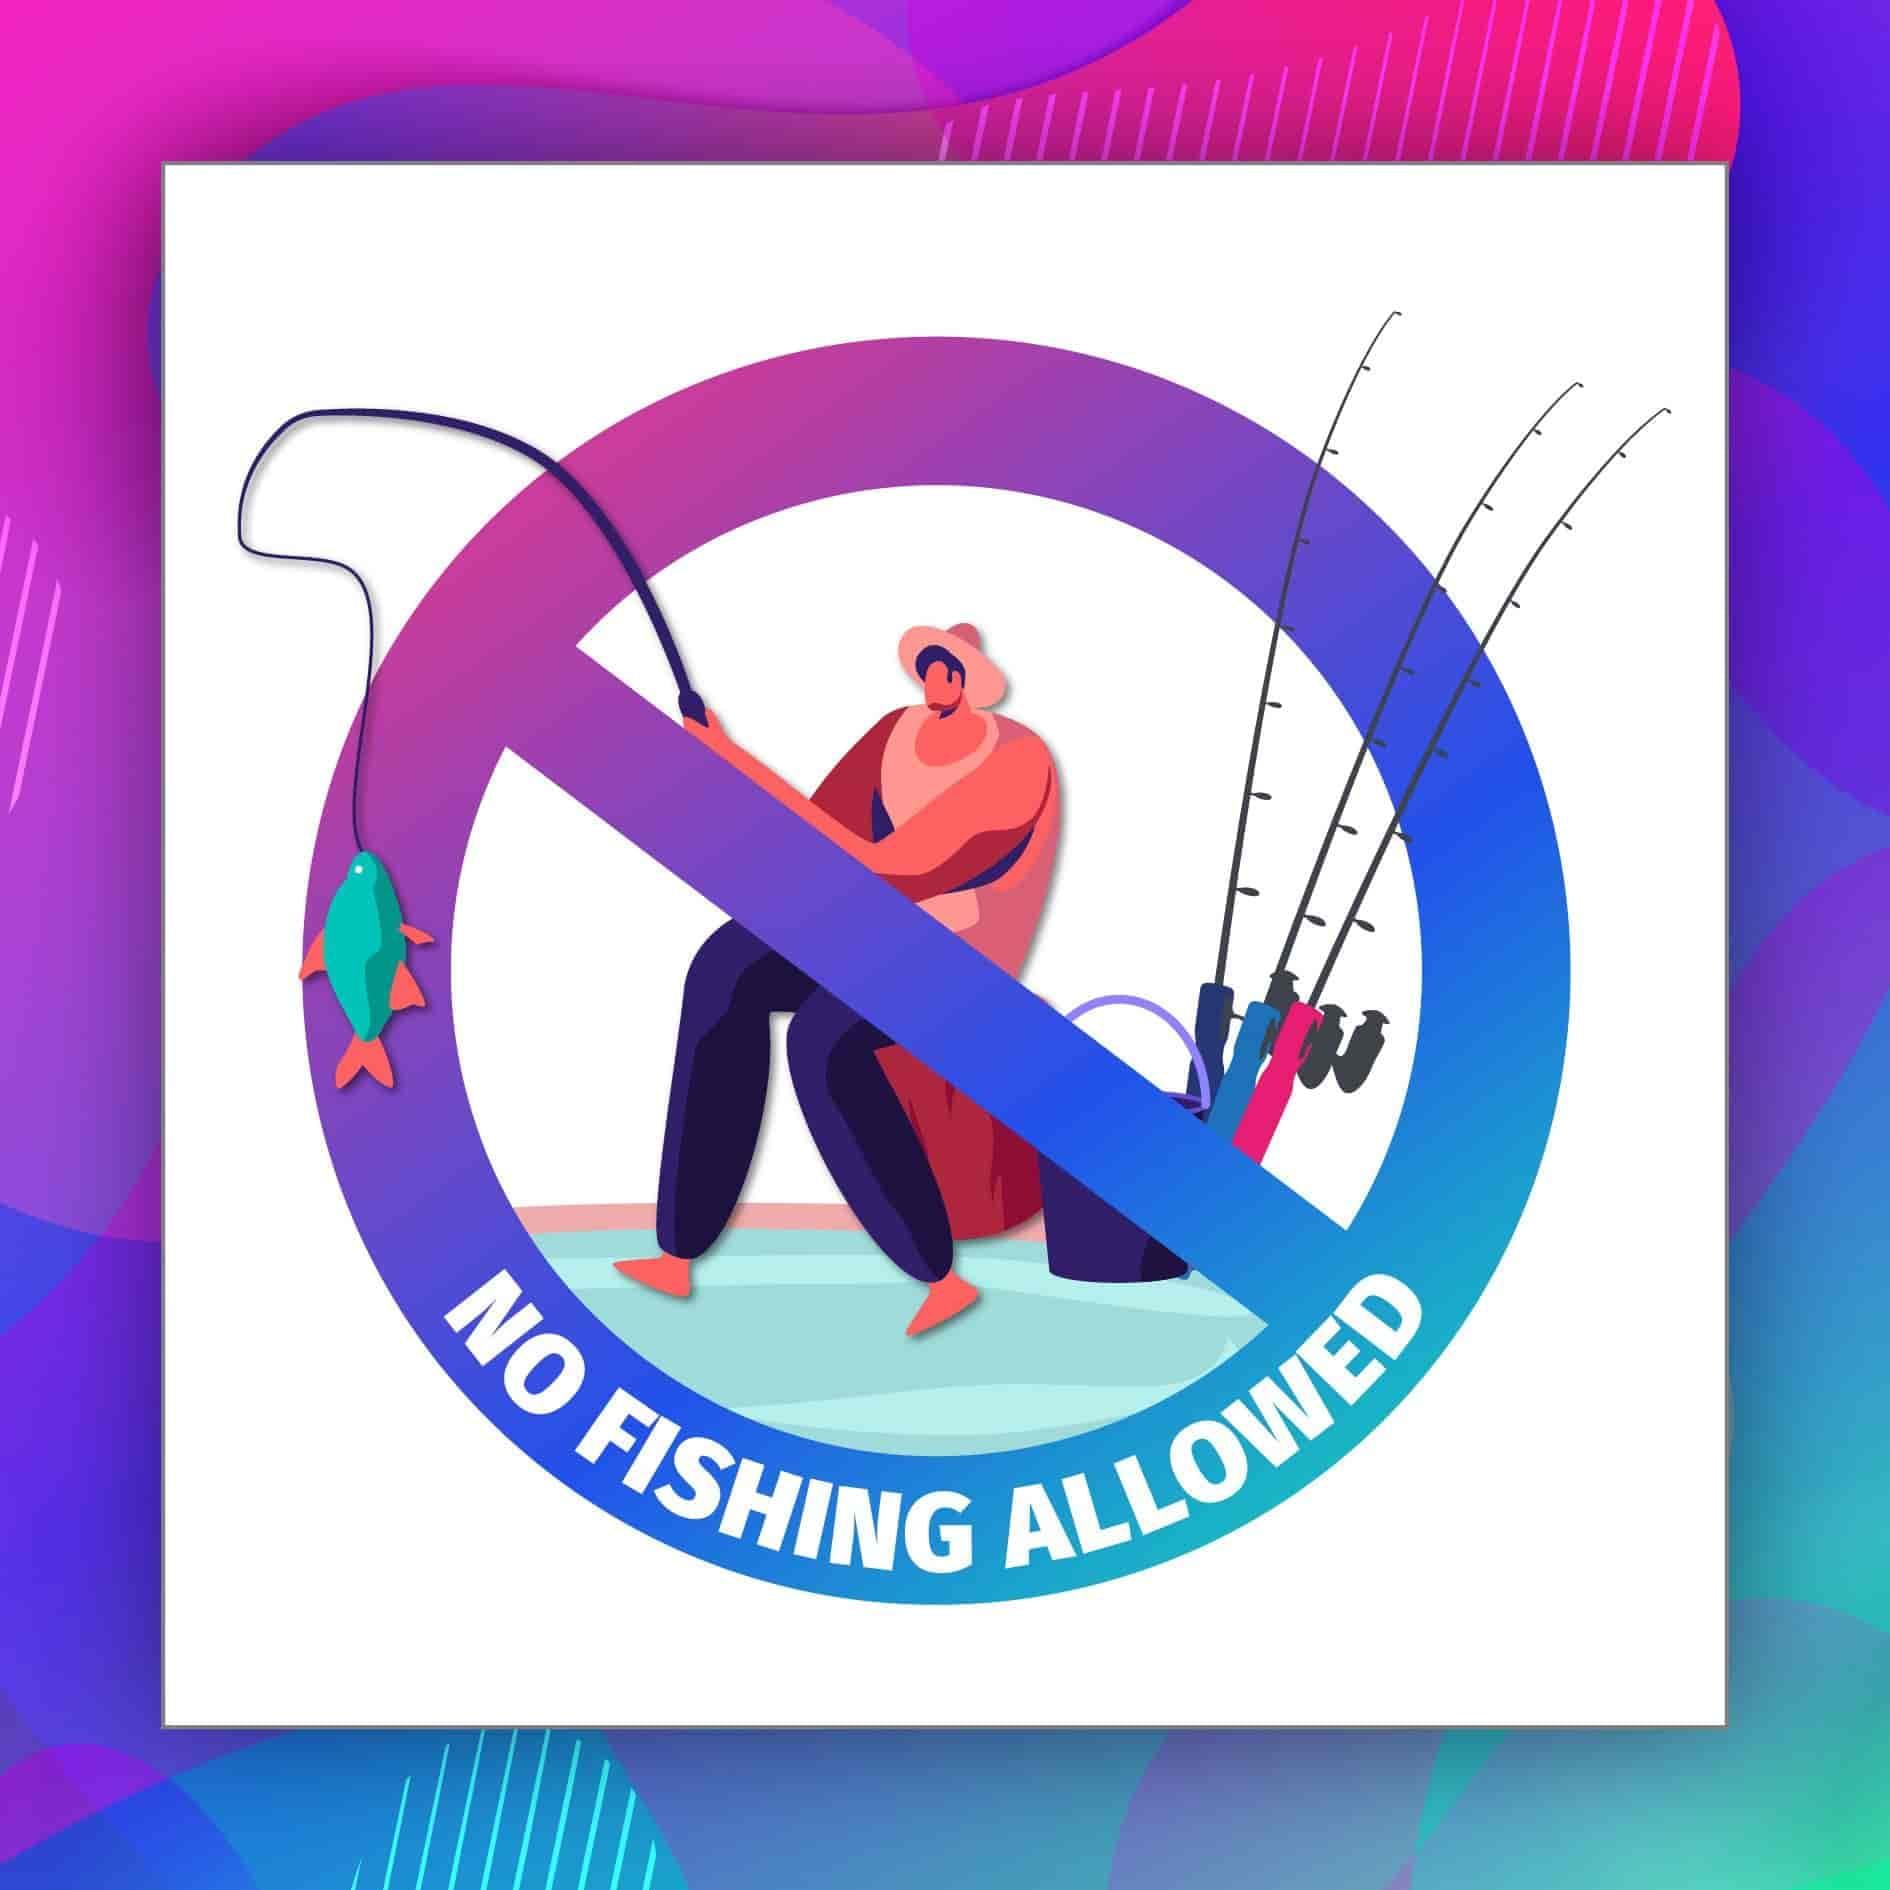 News 2020 - No Fishing Allowed Sign | Lexis Hibiscus® Port Dickson